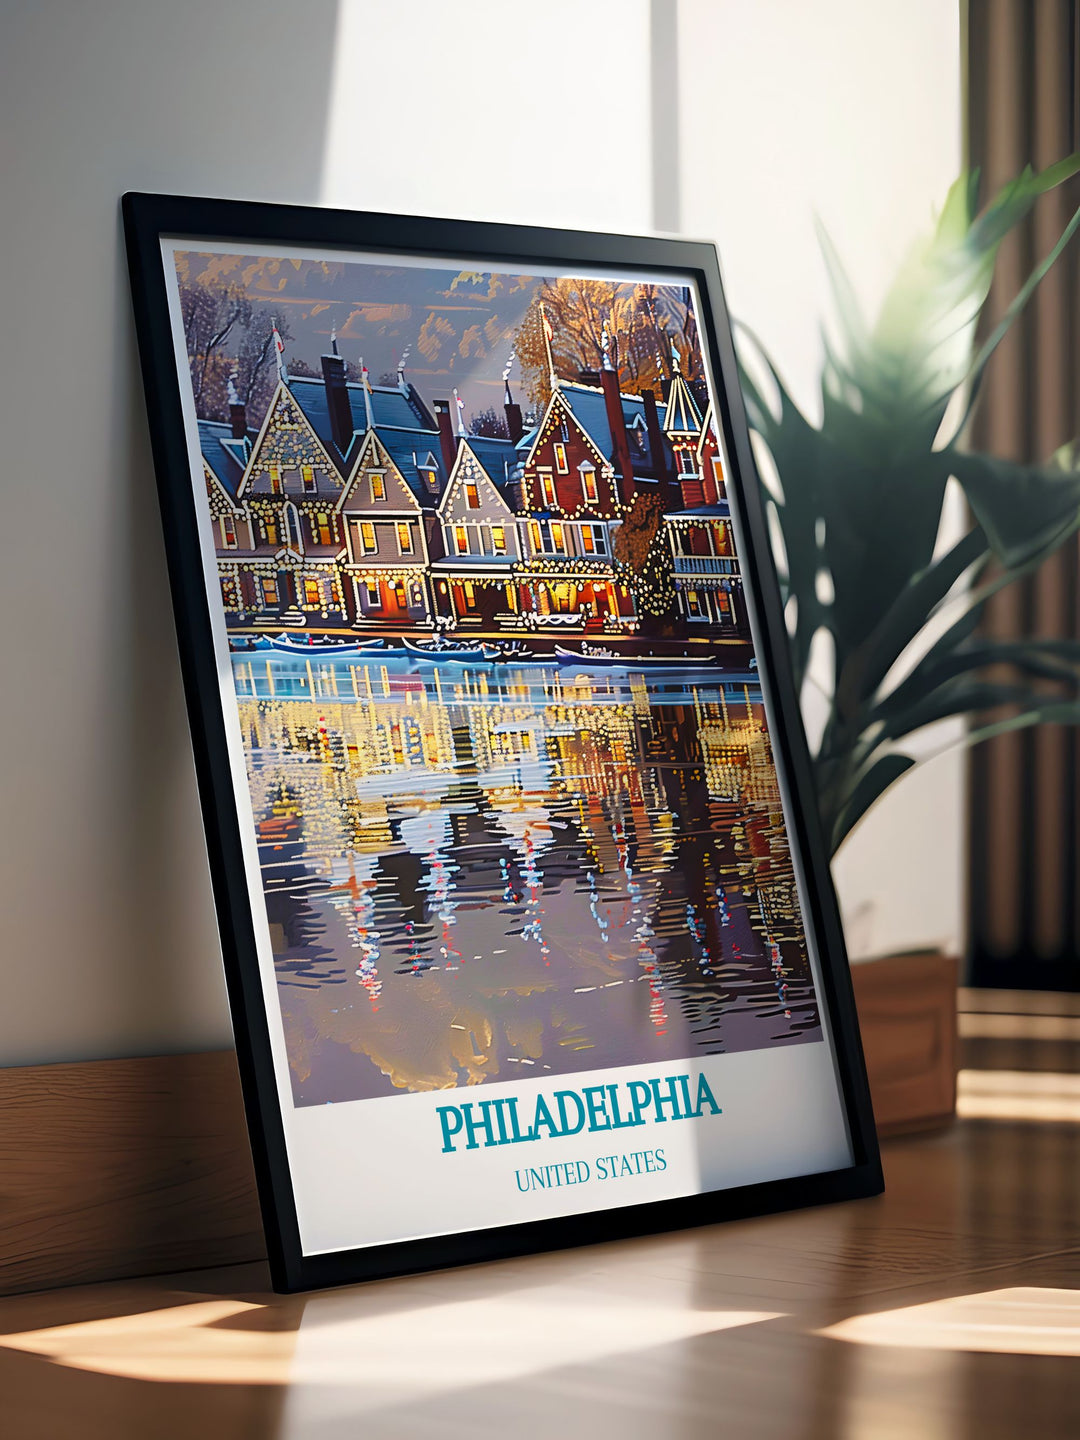 Immerse yourself in the beauty of Philadelphias Boathouse Row with this vibrant art print, showcasing the illuminated facades of the historic boathouses, ideal for any art collection.